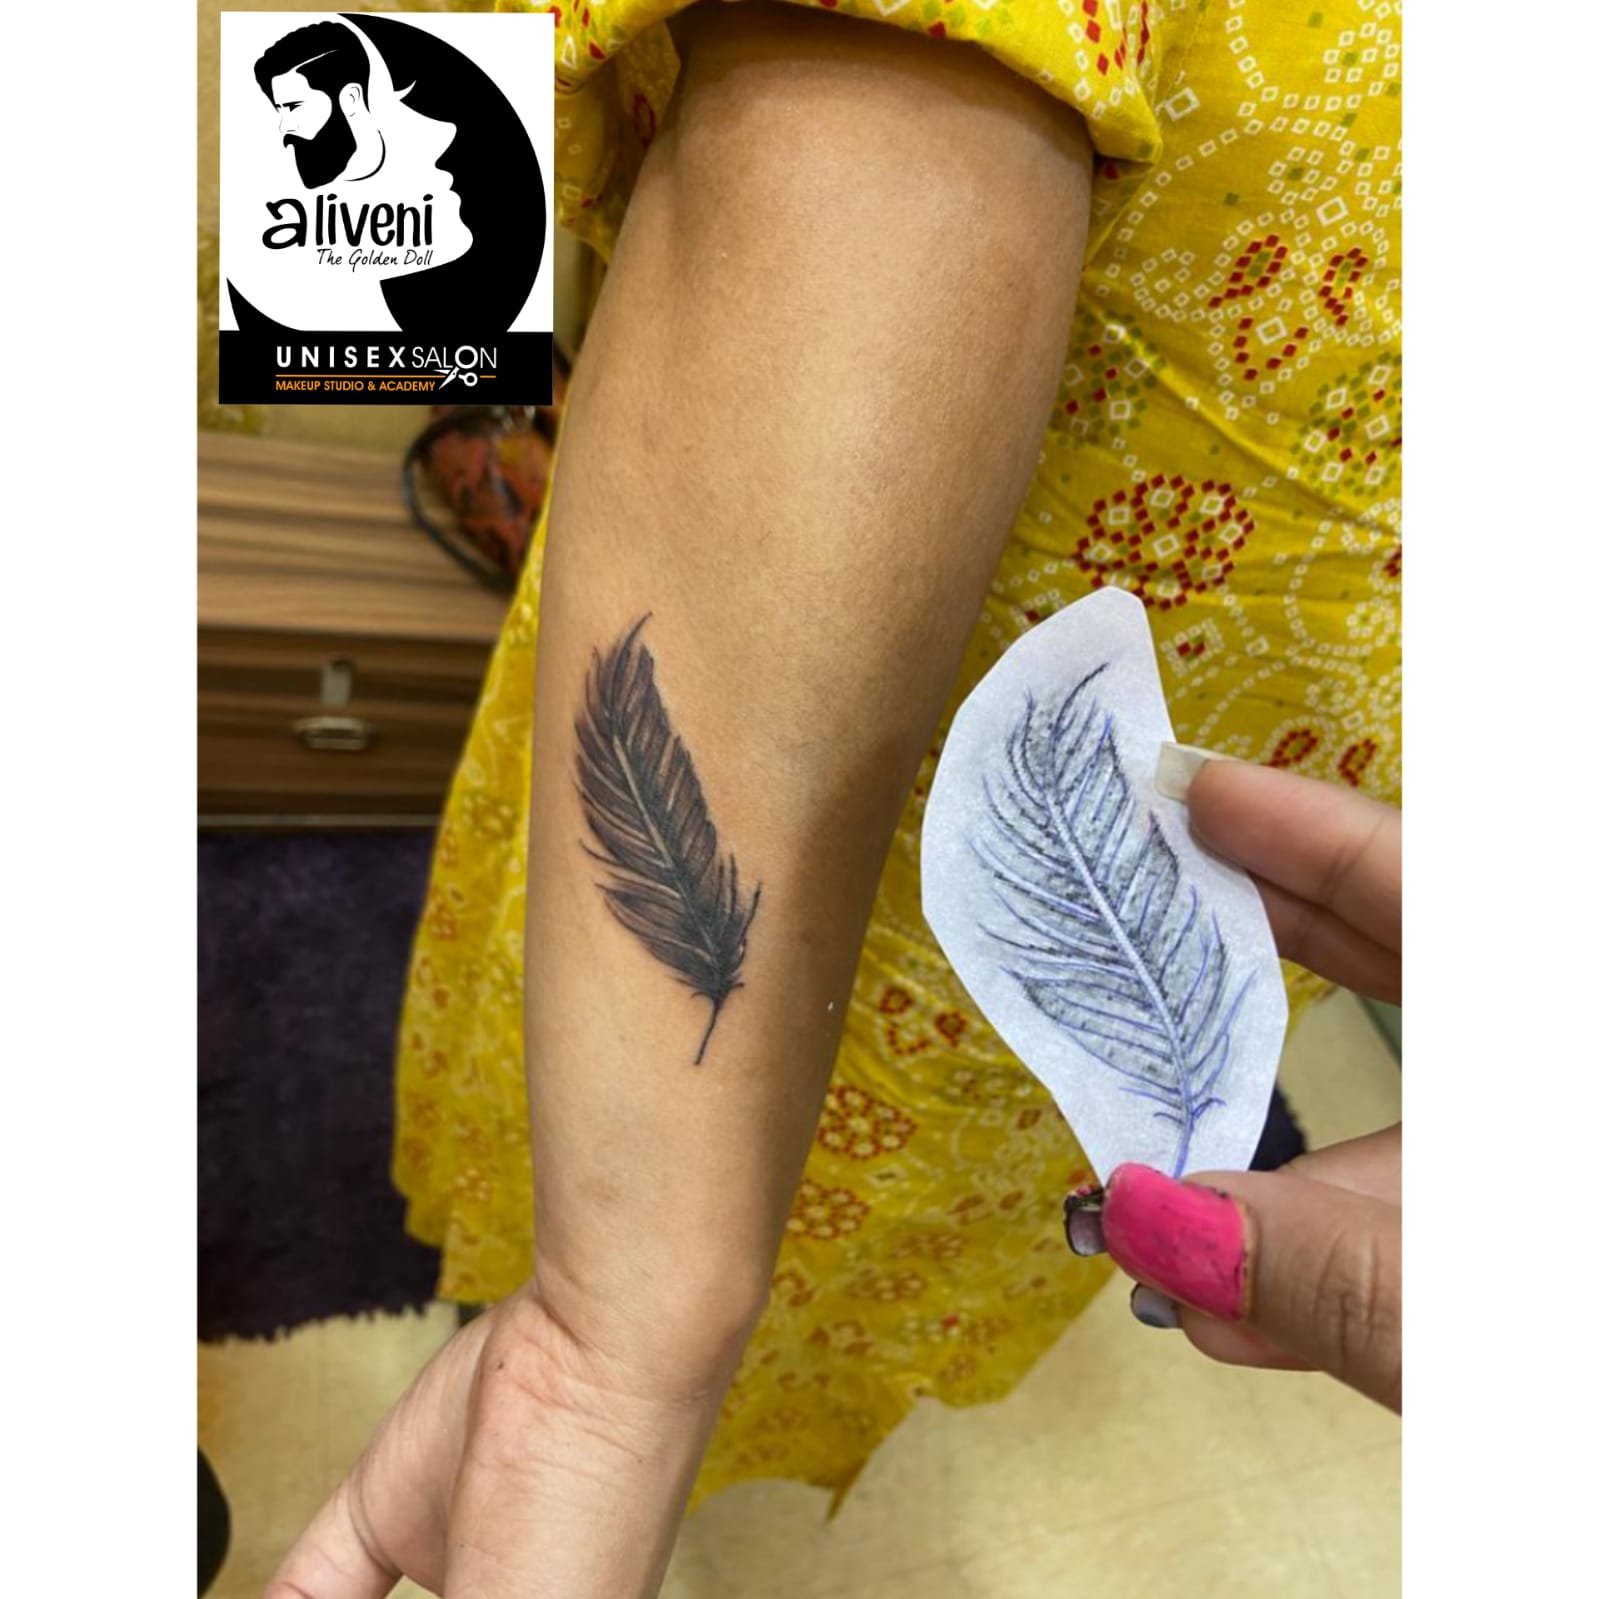 Feather Tattoo: Designs And Their Meanings, Culture và Religion